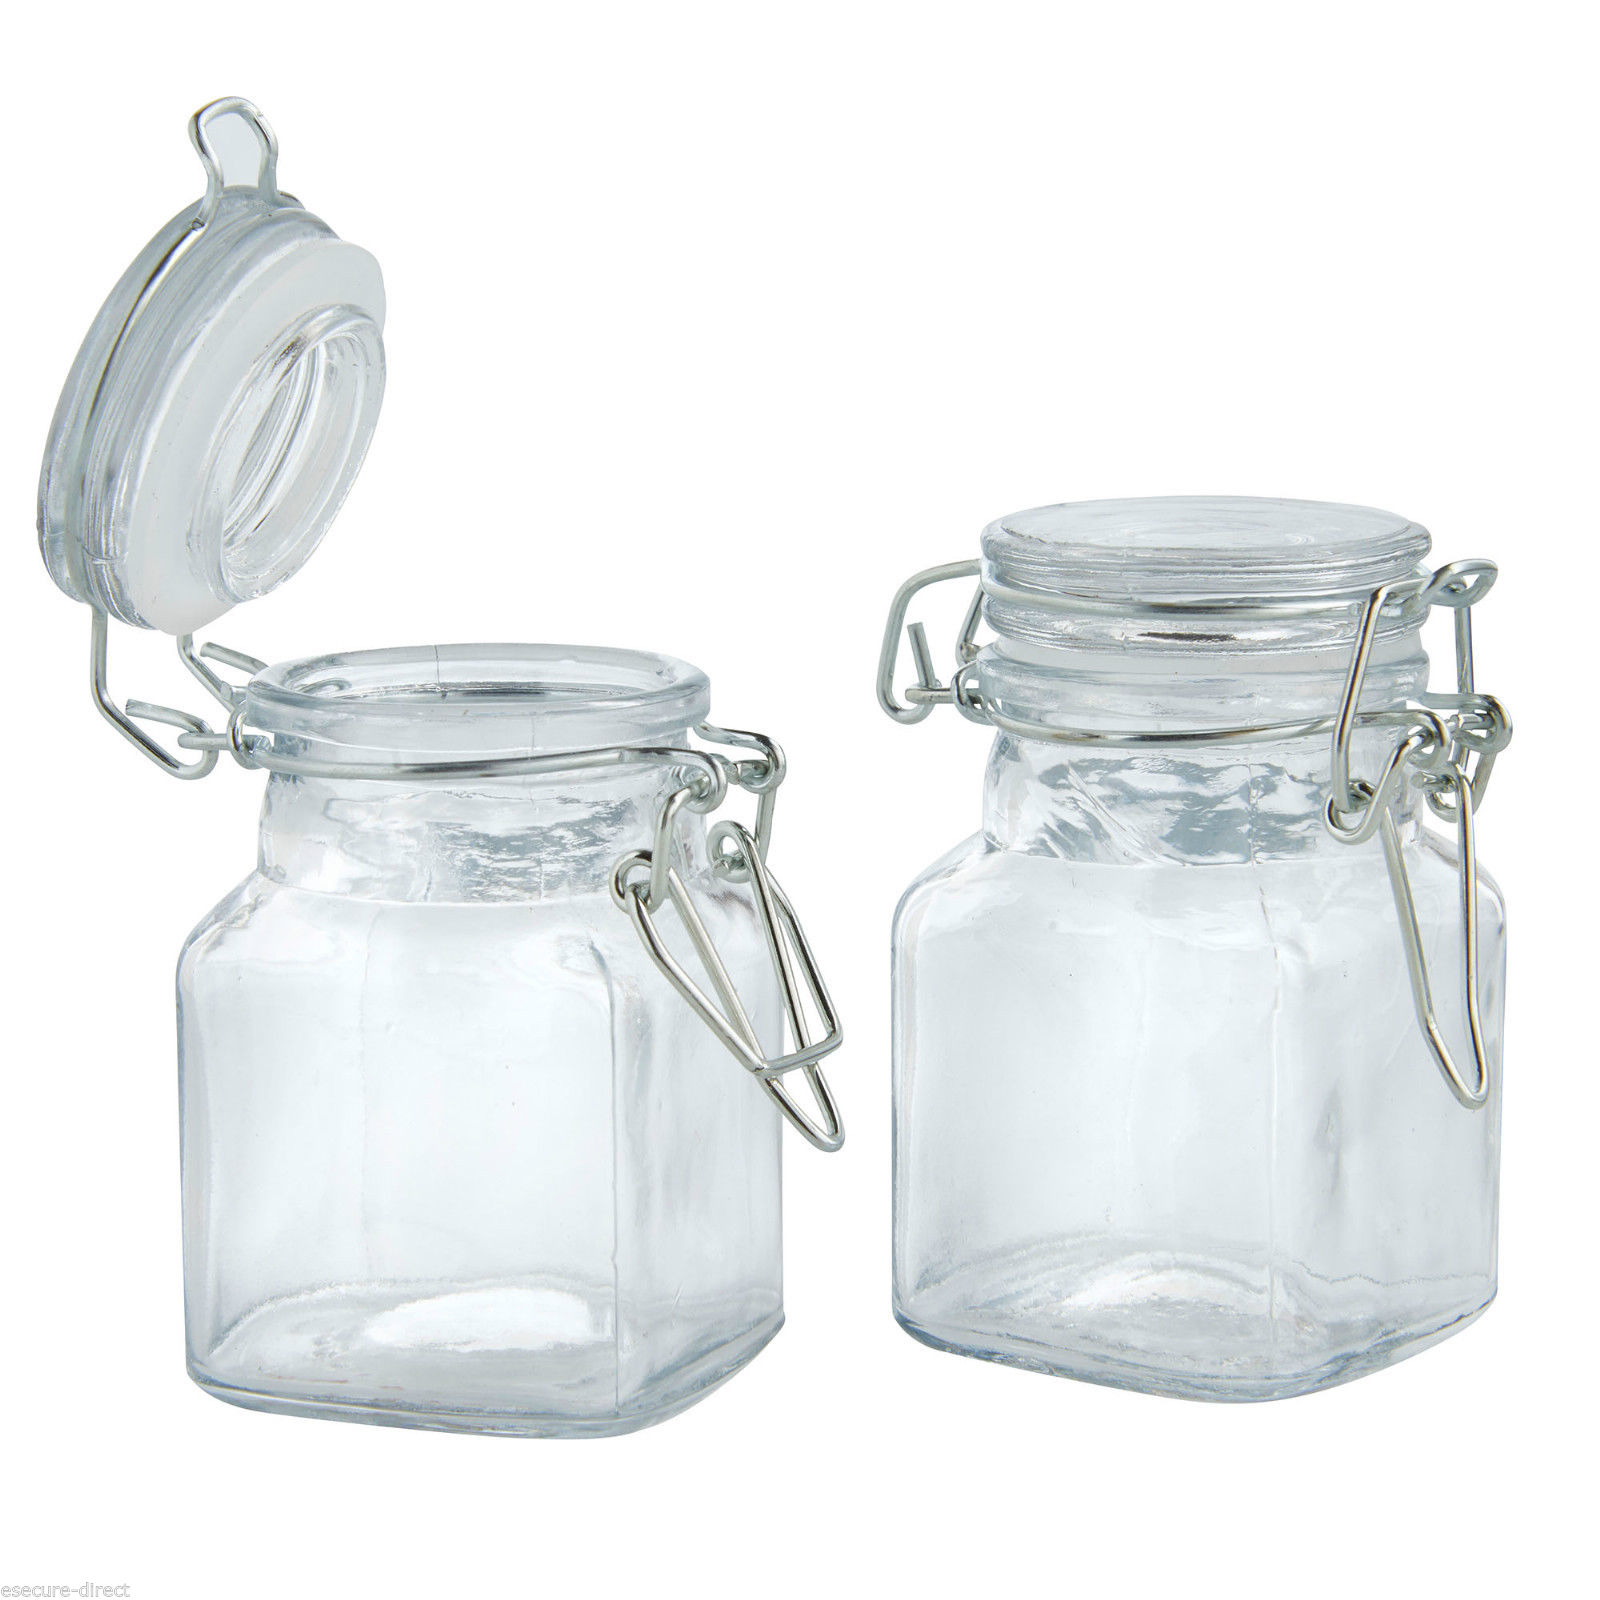 Manufacturing Companies for Large Glass Candy Jars With Lids - VonShef  Mini Clip Top Airtight Seal Food Storage Honey Glass Jar Preserves 100ml – Linlang